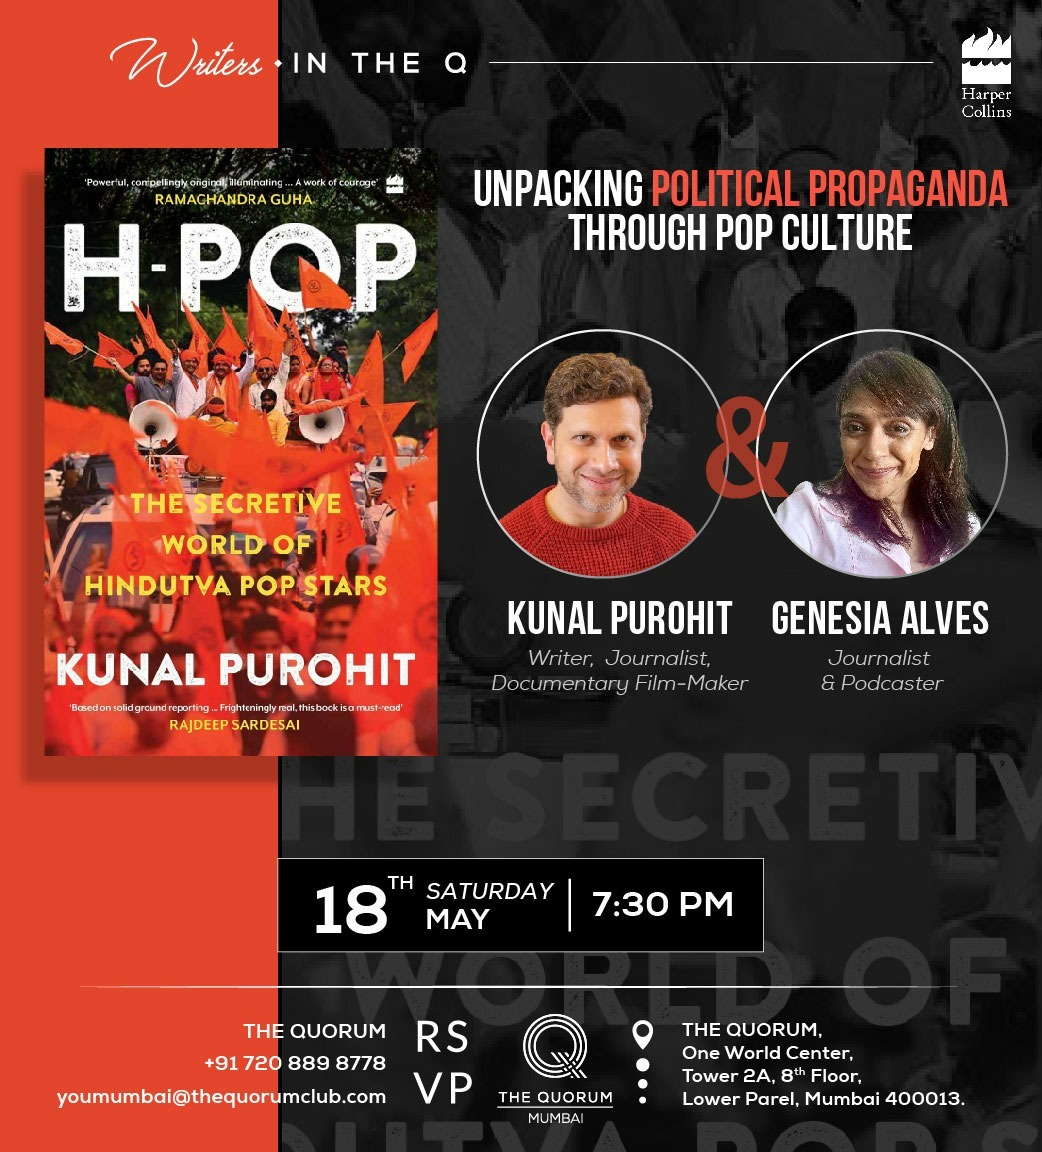 Friends in Mumbai: Two days before Mumbai goes to polls, I'll be in conversation with the terrific @genesiaalves, about H-Pop and the power of propaganda disguised as pop culture. Happening at The Quroum on the 18th, at 7.30pm. Do come. @swatichopra1 @HarperCollinsIN @jilpanz